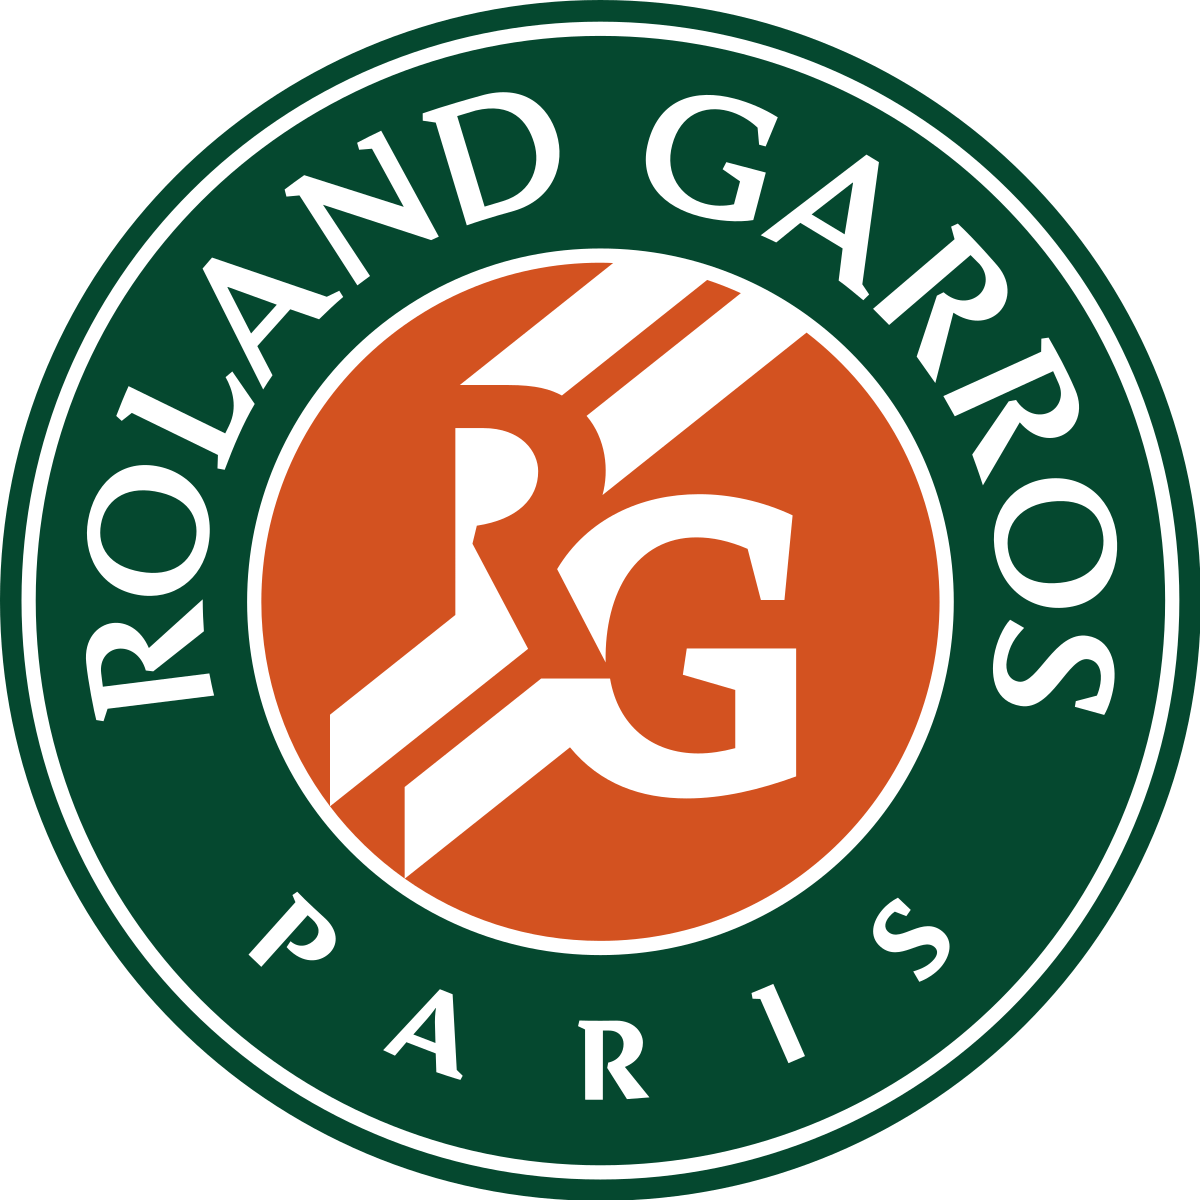 Famous Tennis Logo - French Open